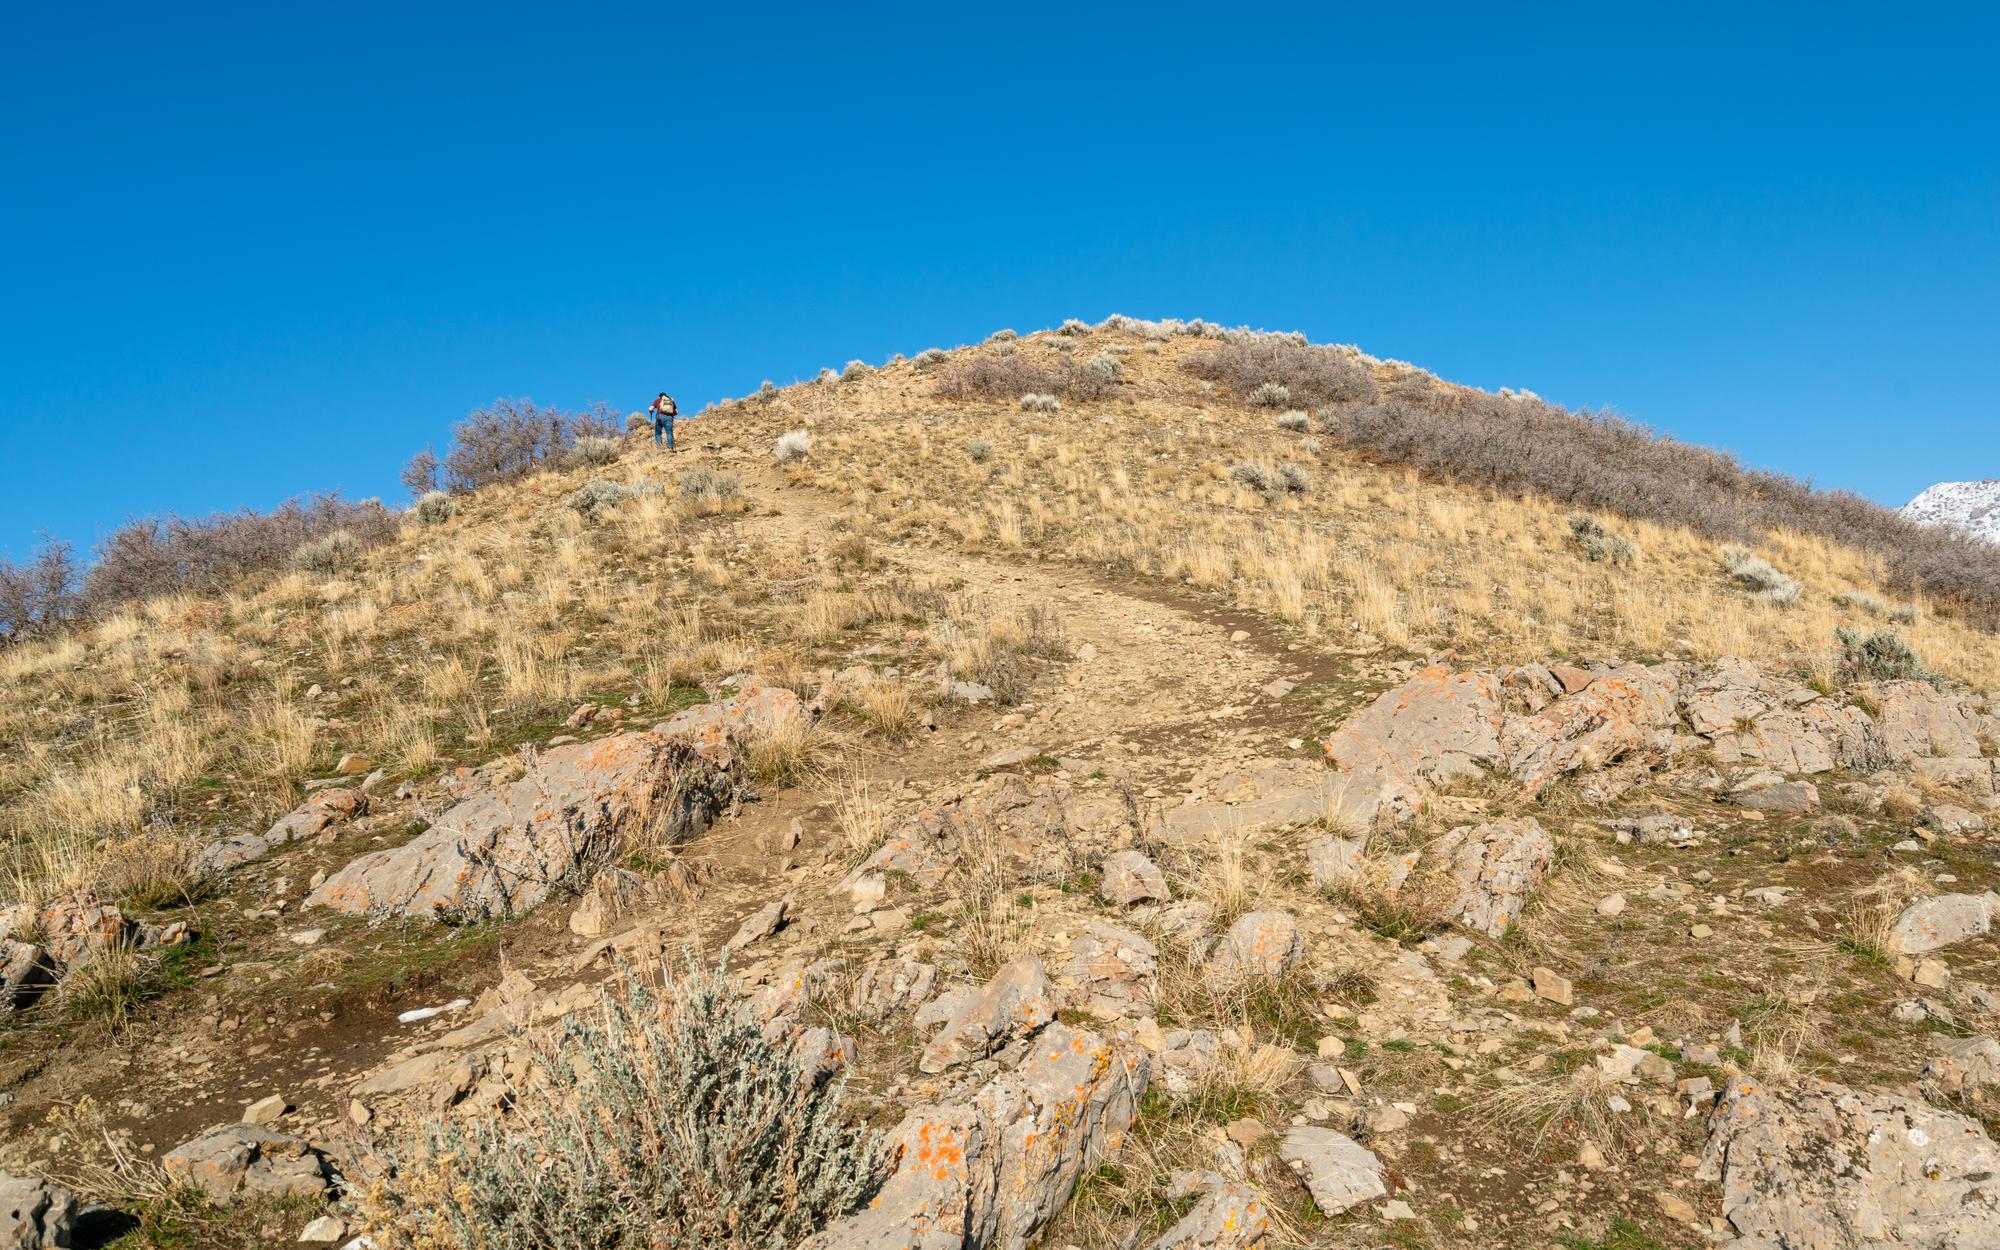 View of the final ascent of Jack's Mountain trail with a man hiking up a steep trail.